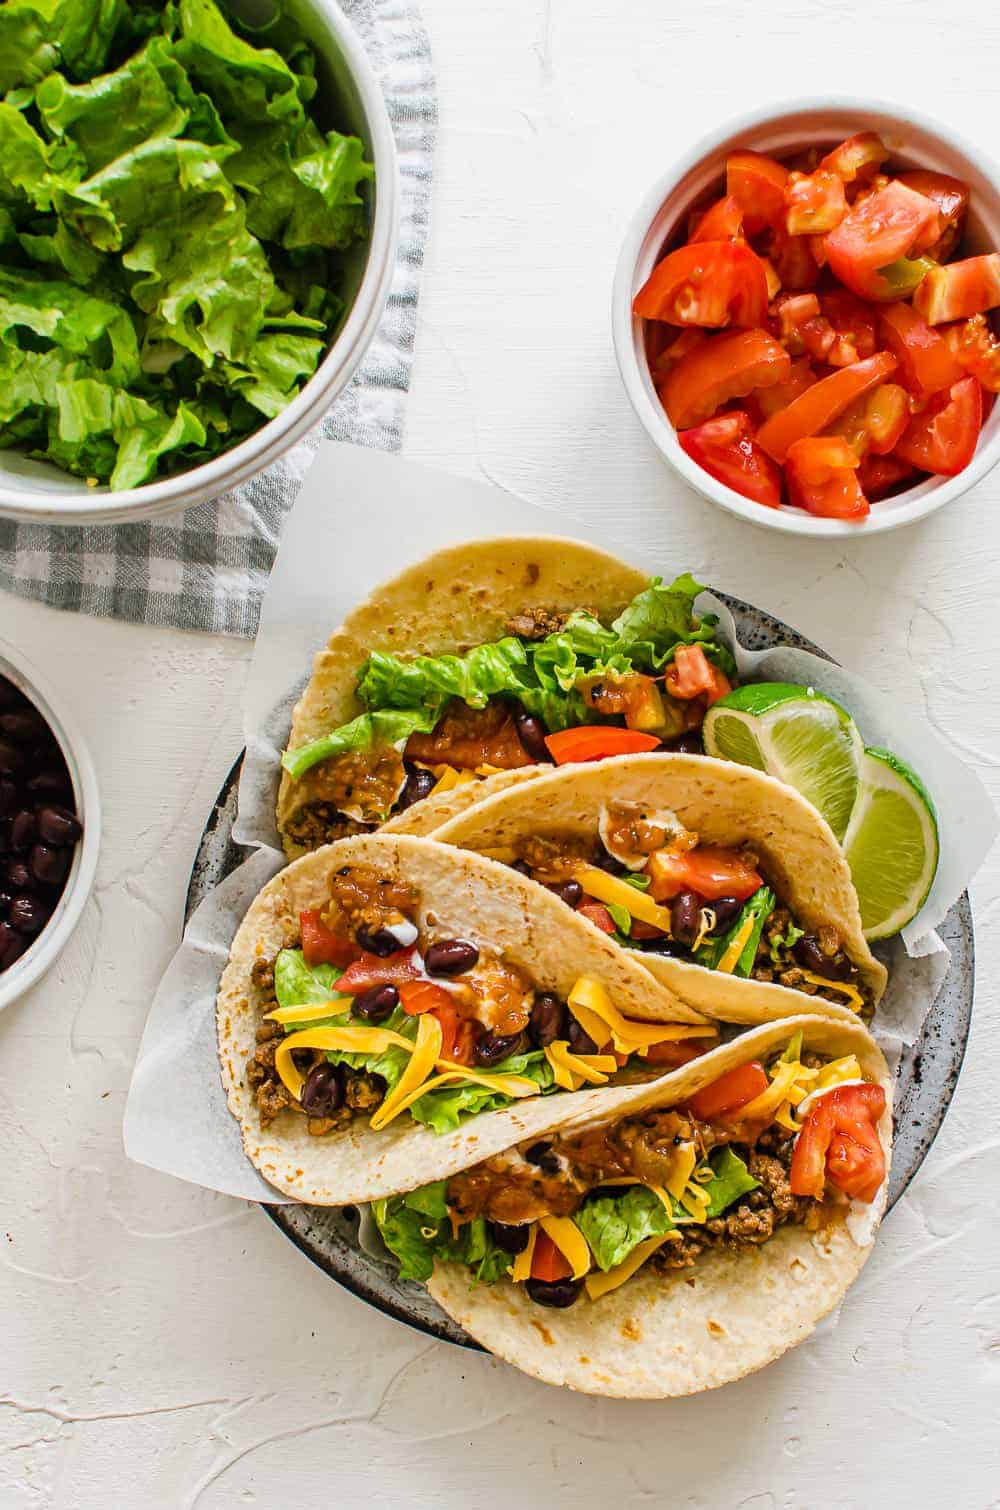 Ground Beef Tacos on a tray with tomatoes and lettuce in bowls on the side.